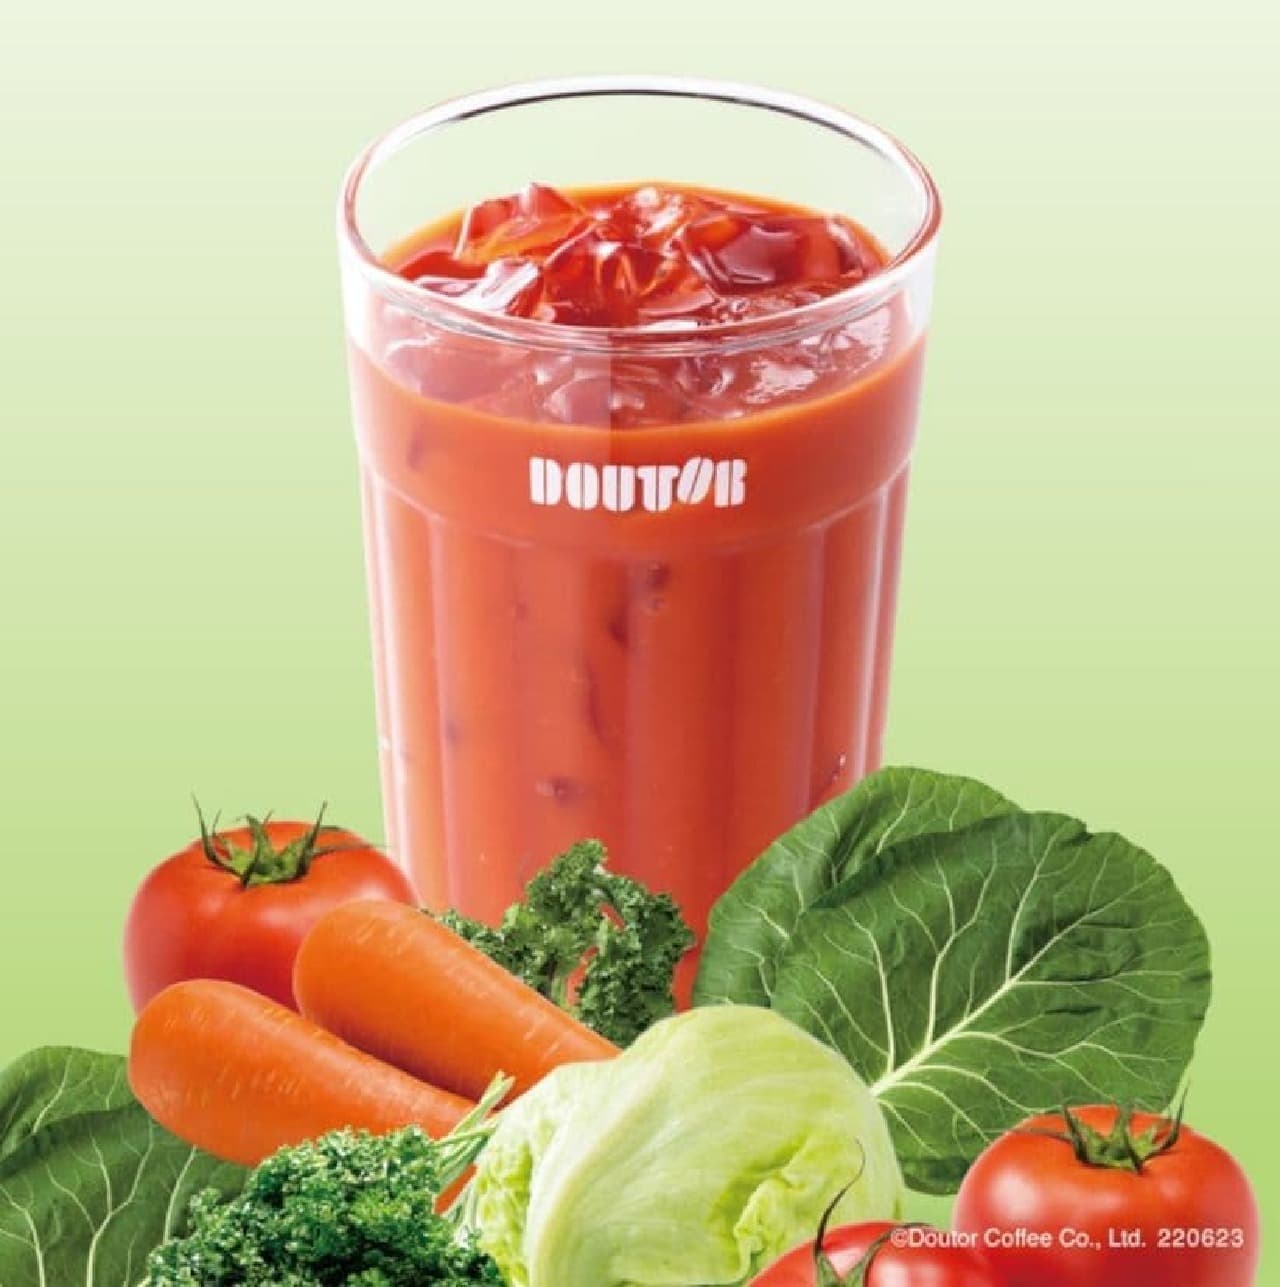 Doutor "A day's worth of vegetable juice containing 15 kinds of vegetables"